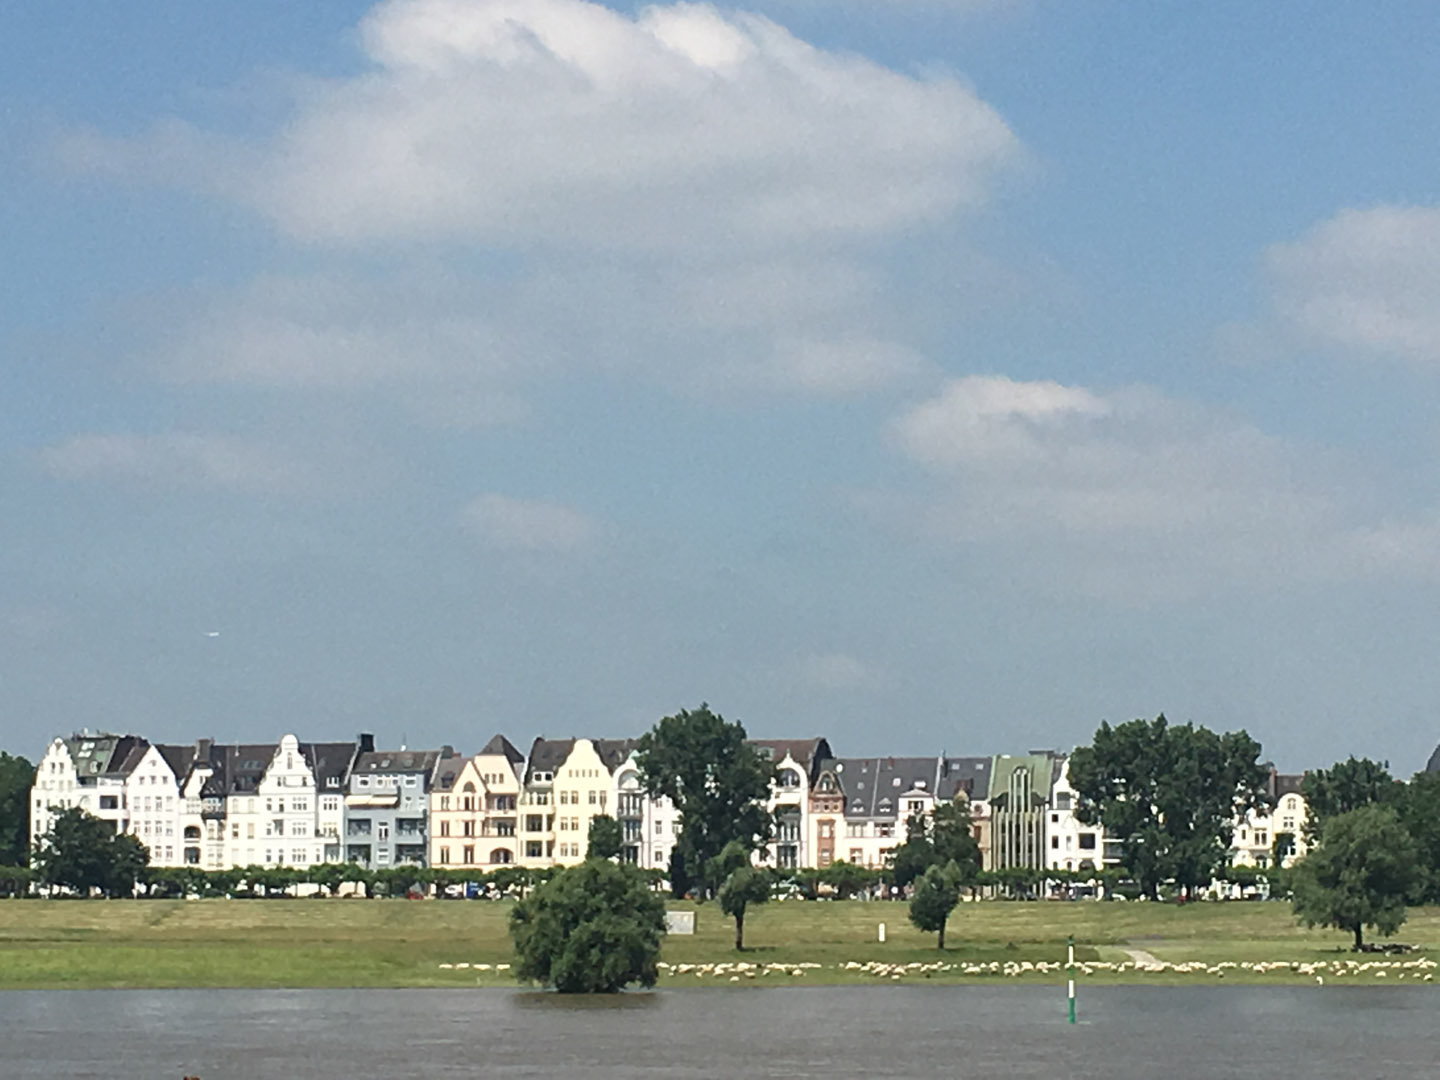 View across the Rhine from Dusseldorf